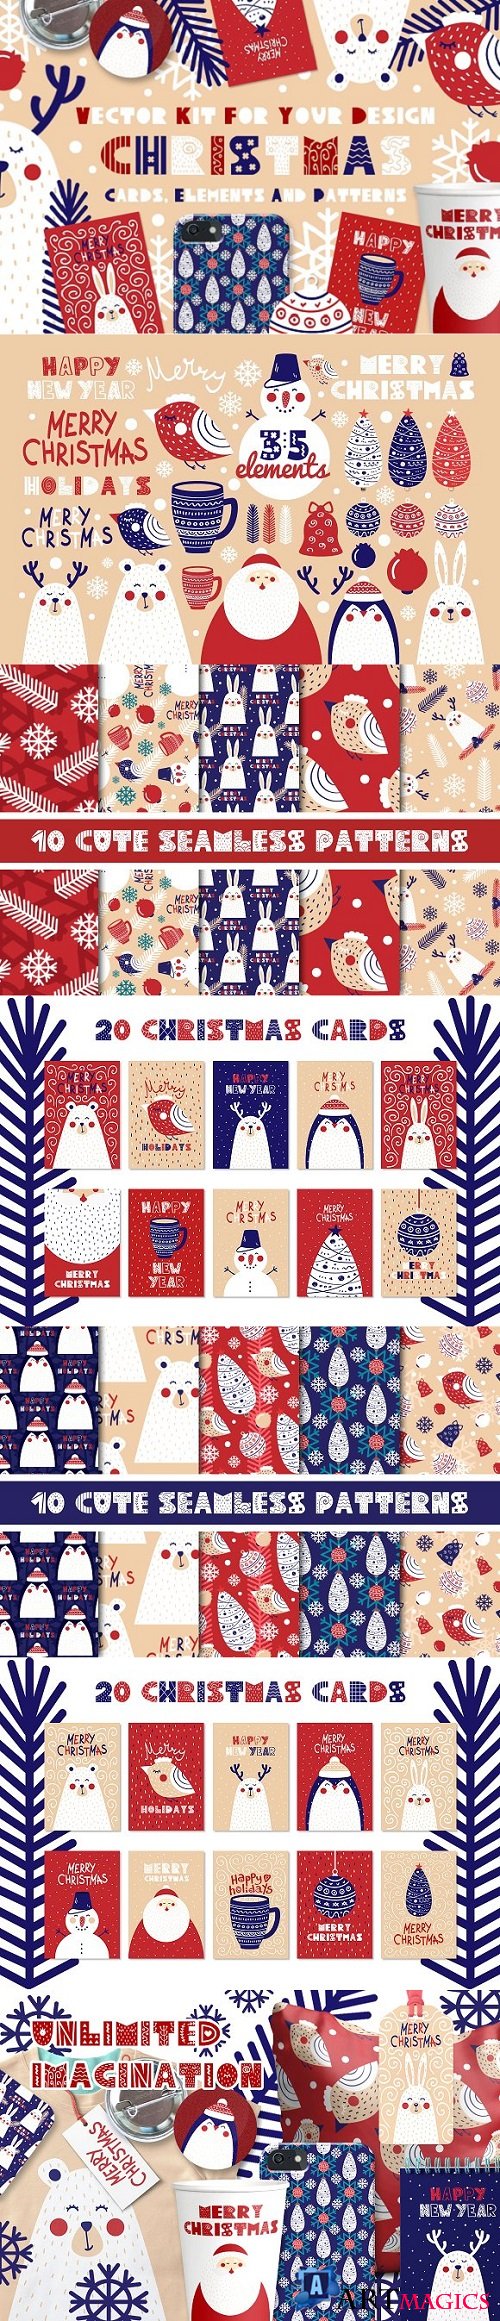 Christmas cards, elements & patterns - 2063768